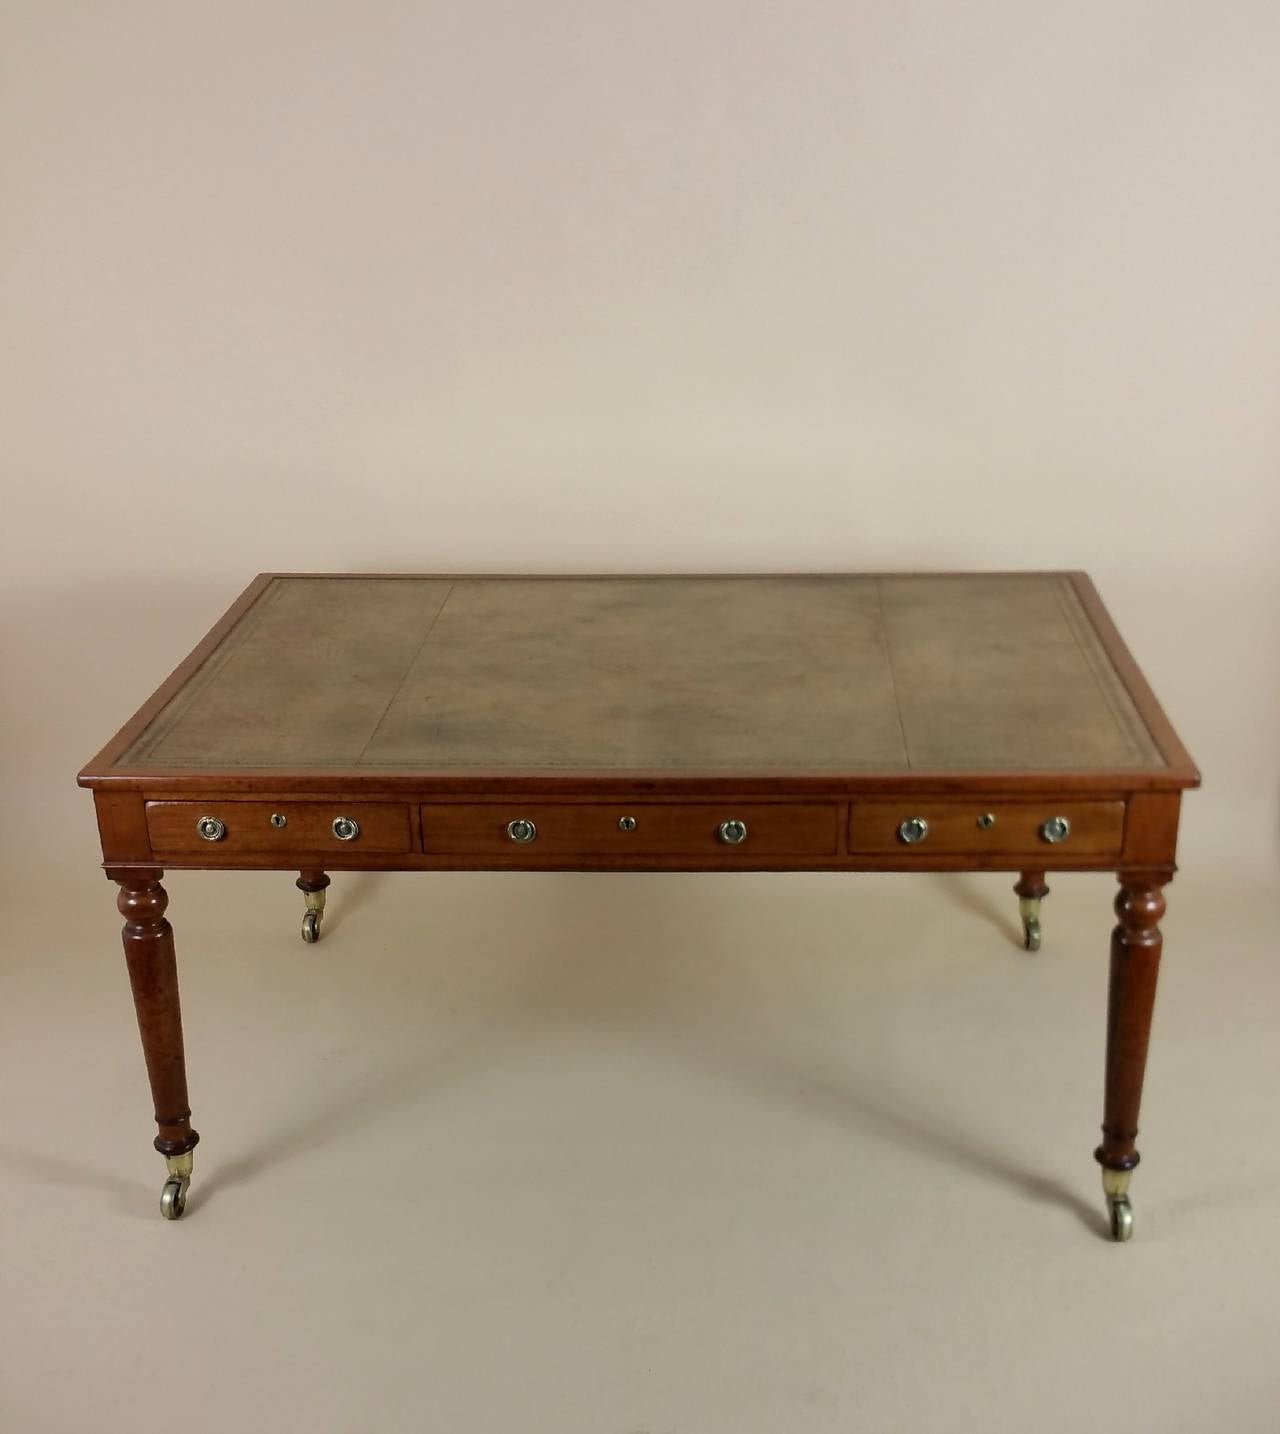 This fine quality and extremely handsome Victorian mahogany writing table features large and sturdy brass castors on tapered turned legs and brass hardware. The table was made by S & H Jewell of London, well known cabinet makers of the period and